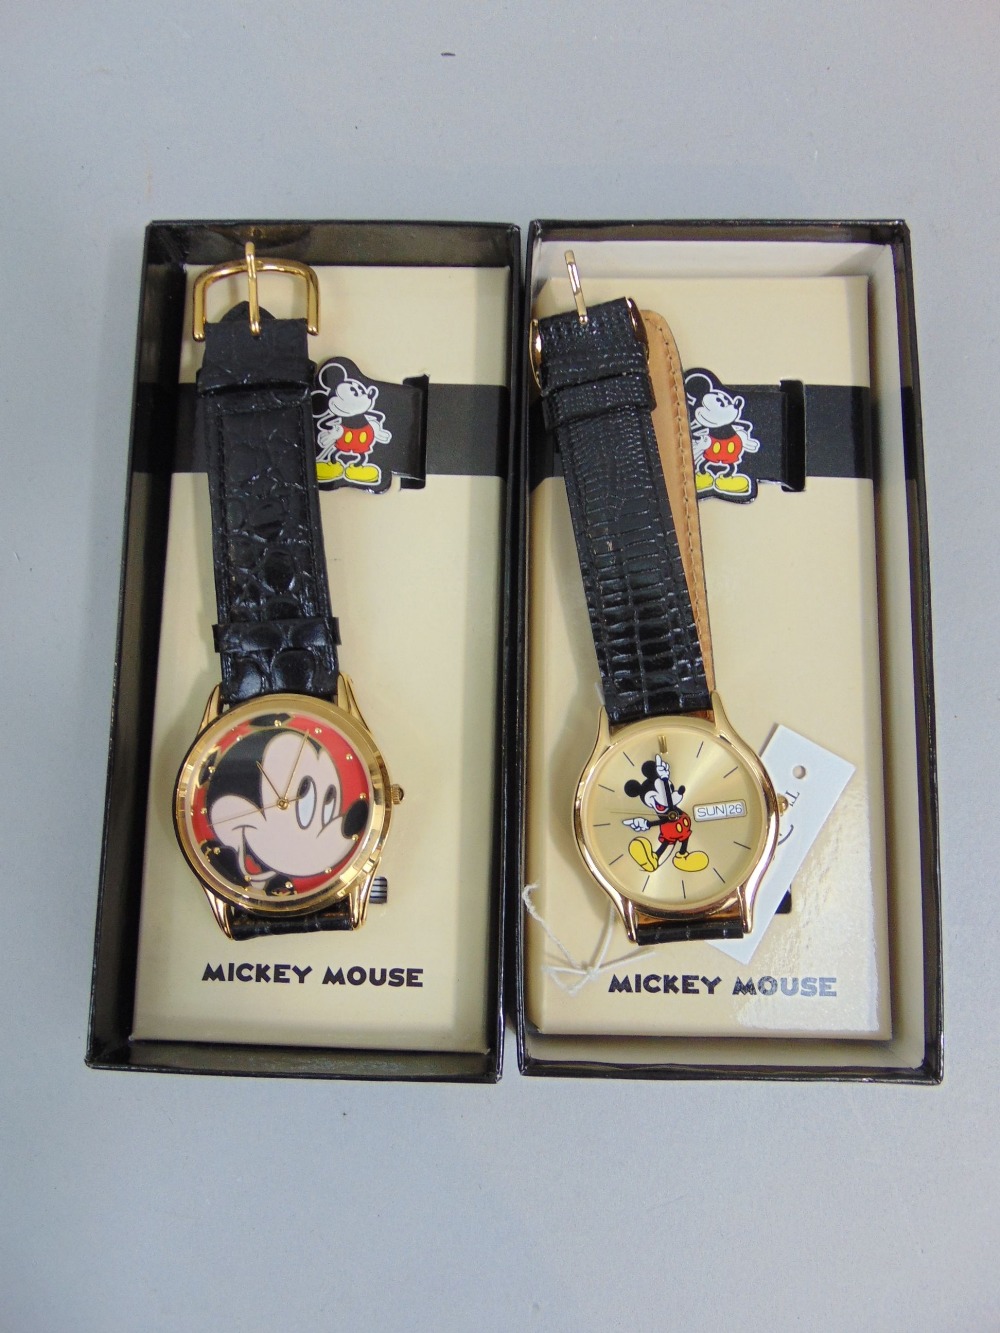 Eleven watches all featuring Mickey Mouse on the watch face, some in original boxes (11) - Image 2 of 2